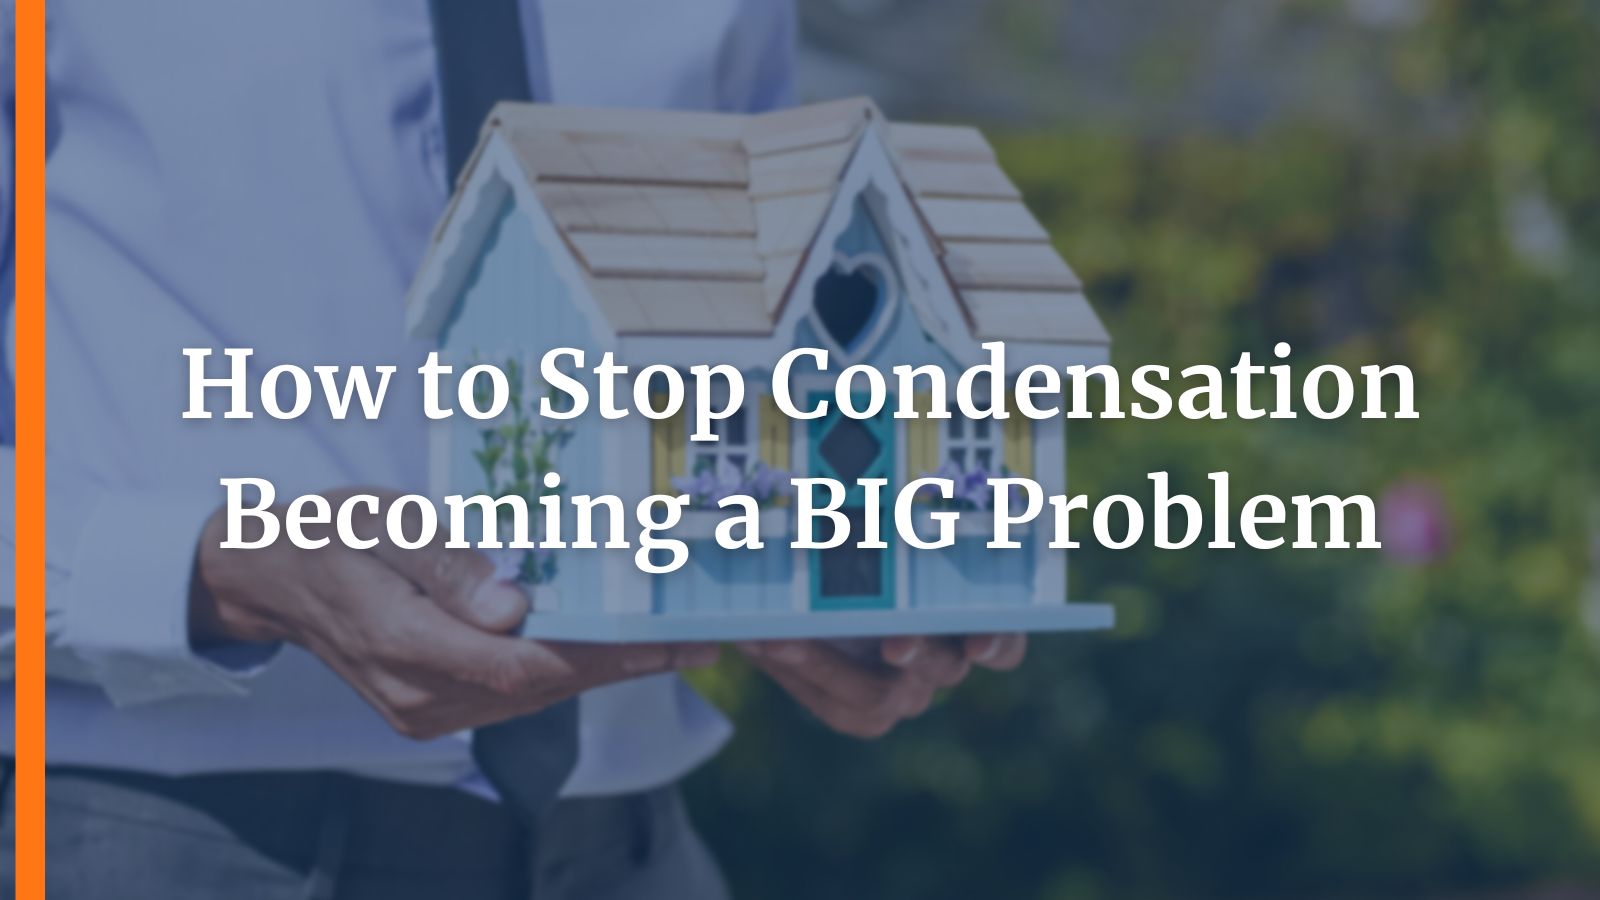 How to Stop Condensation Becoming a BIG Problem